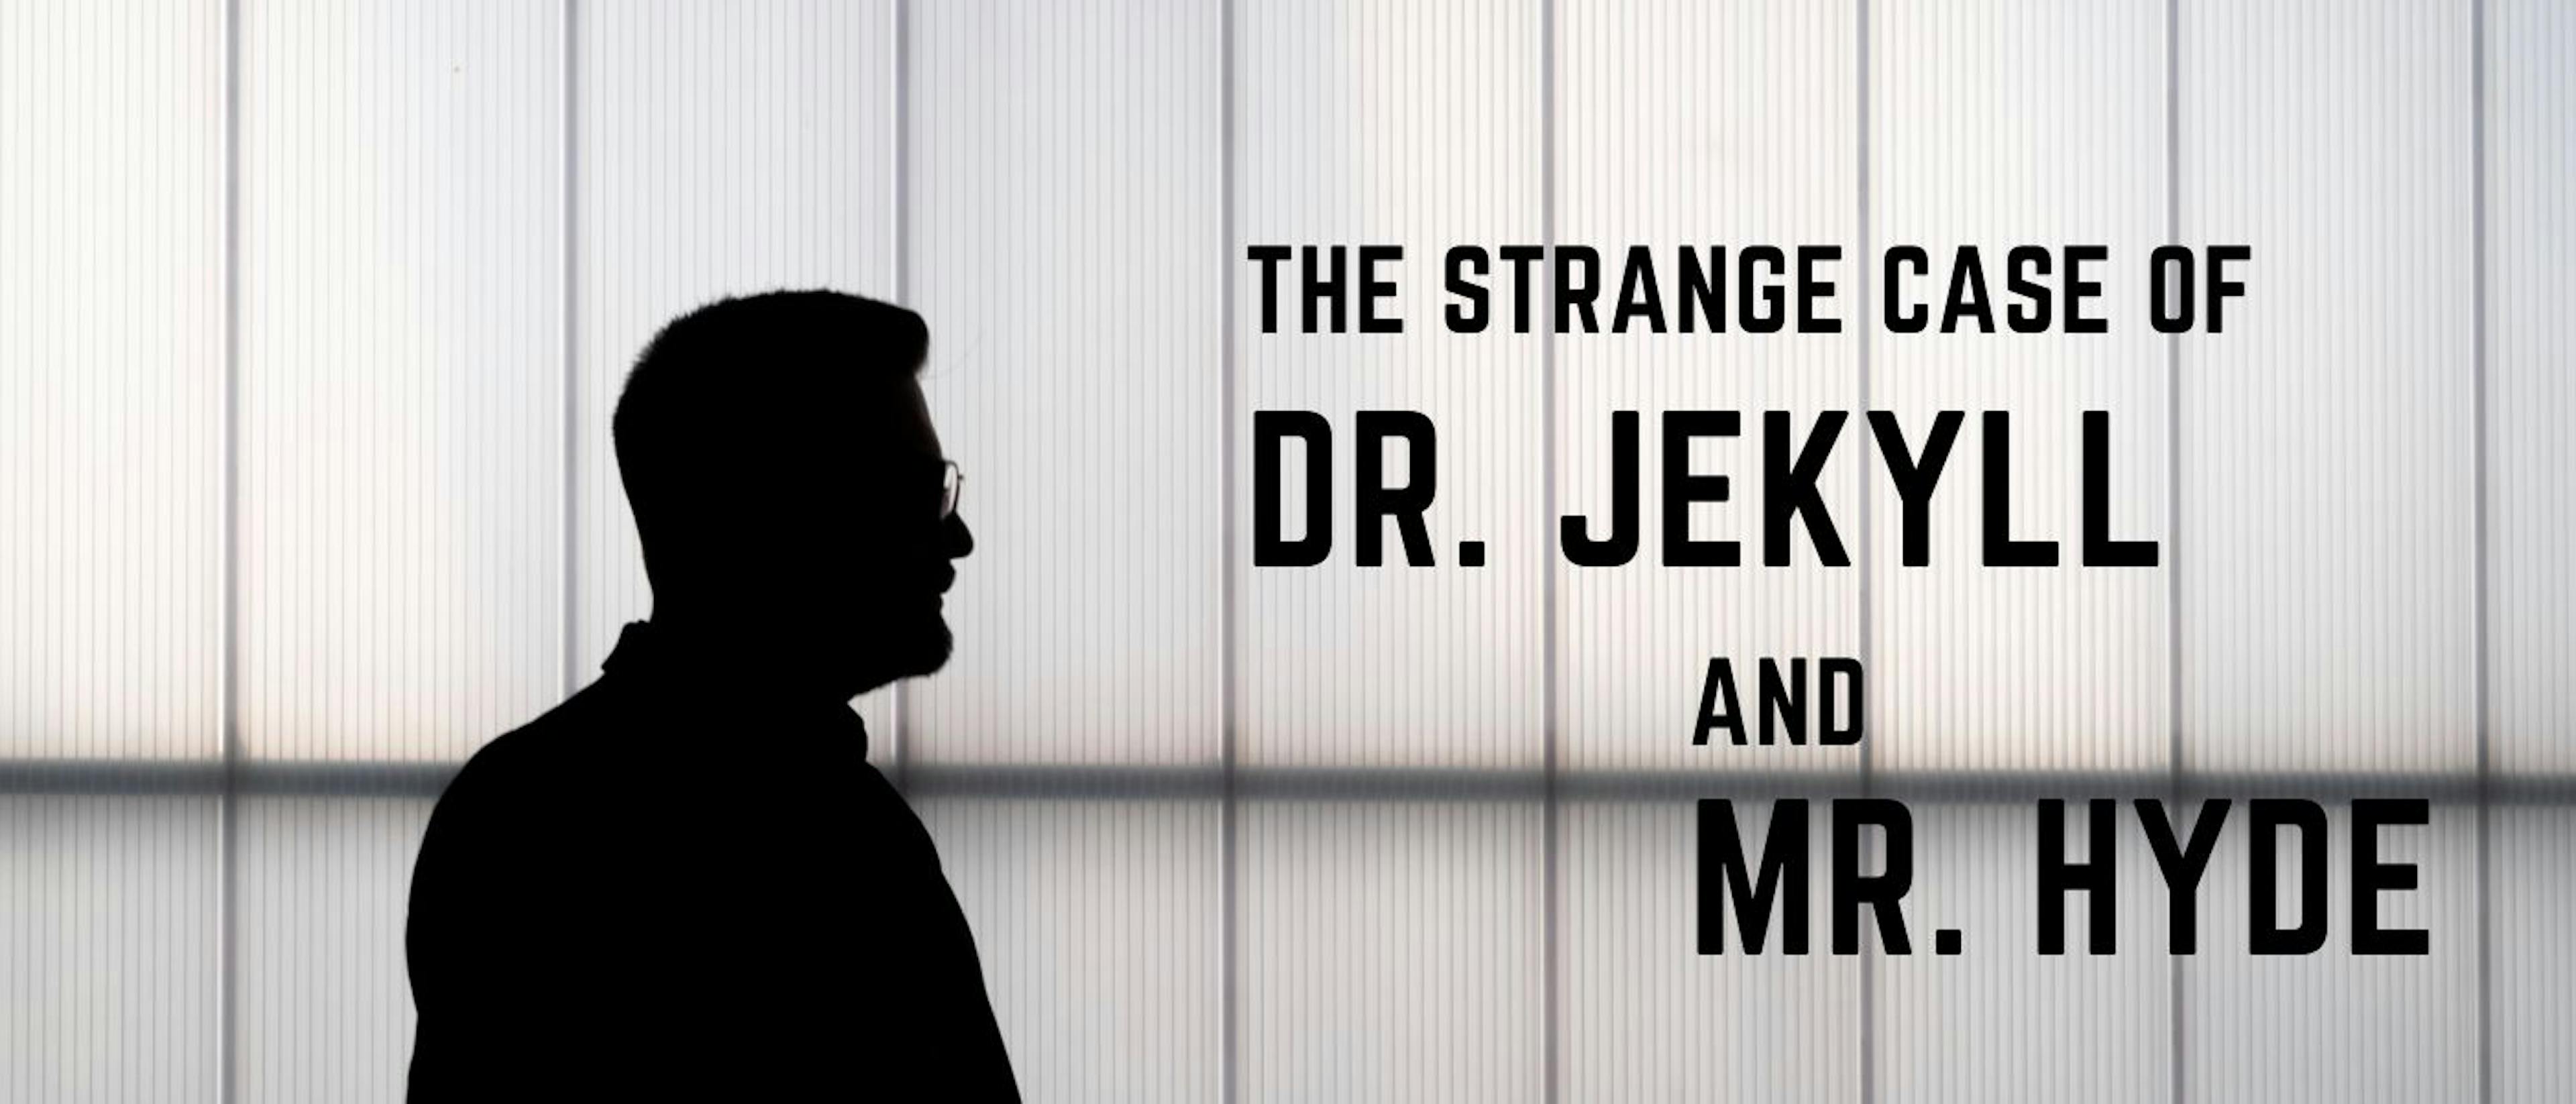 featured image - The Strange Case Of Dr. Jekyll And Mr. Hyde: Chapter III - Dr. Jekyll was quite at ease 